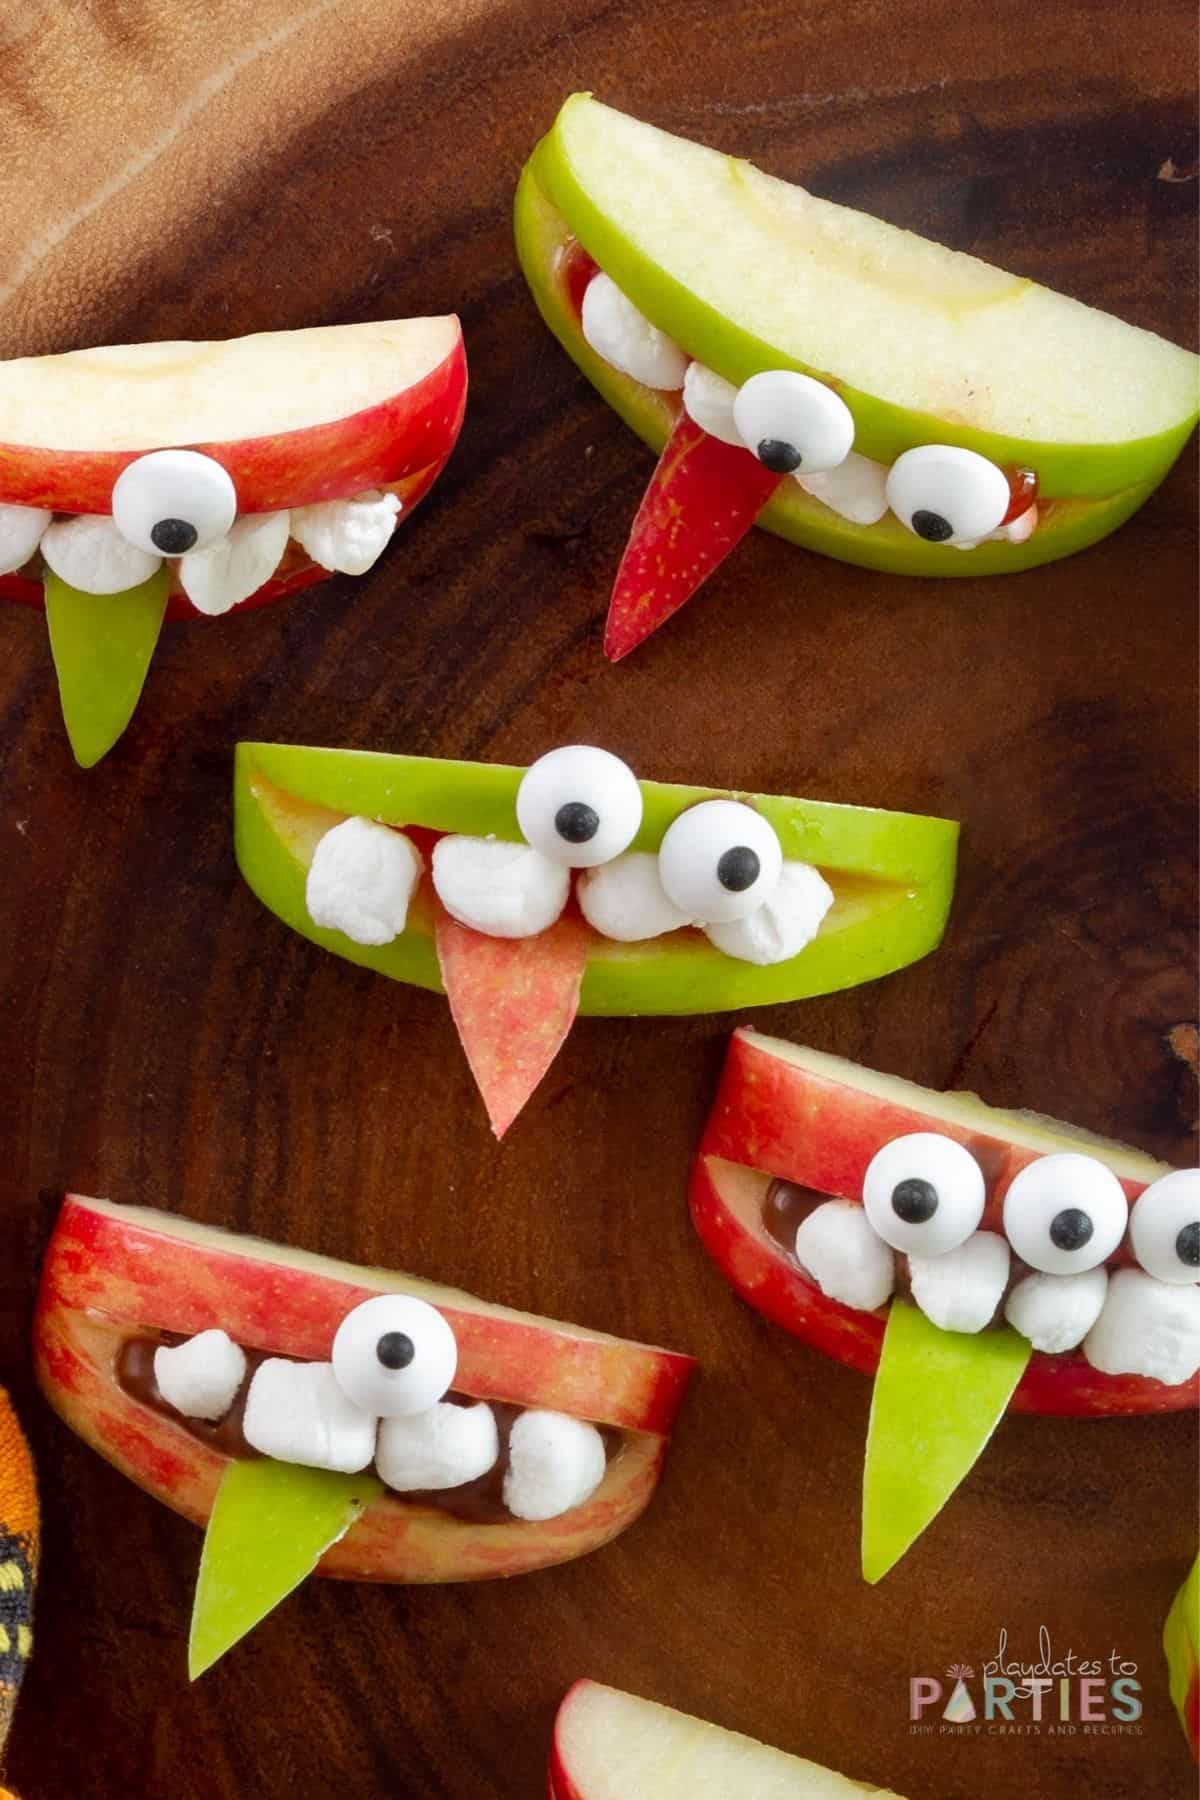 Overhead view of green and red apple wedges decorated with marshmallow teeth and candy eyeballs to look like cute monsters.